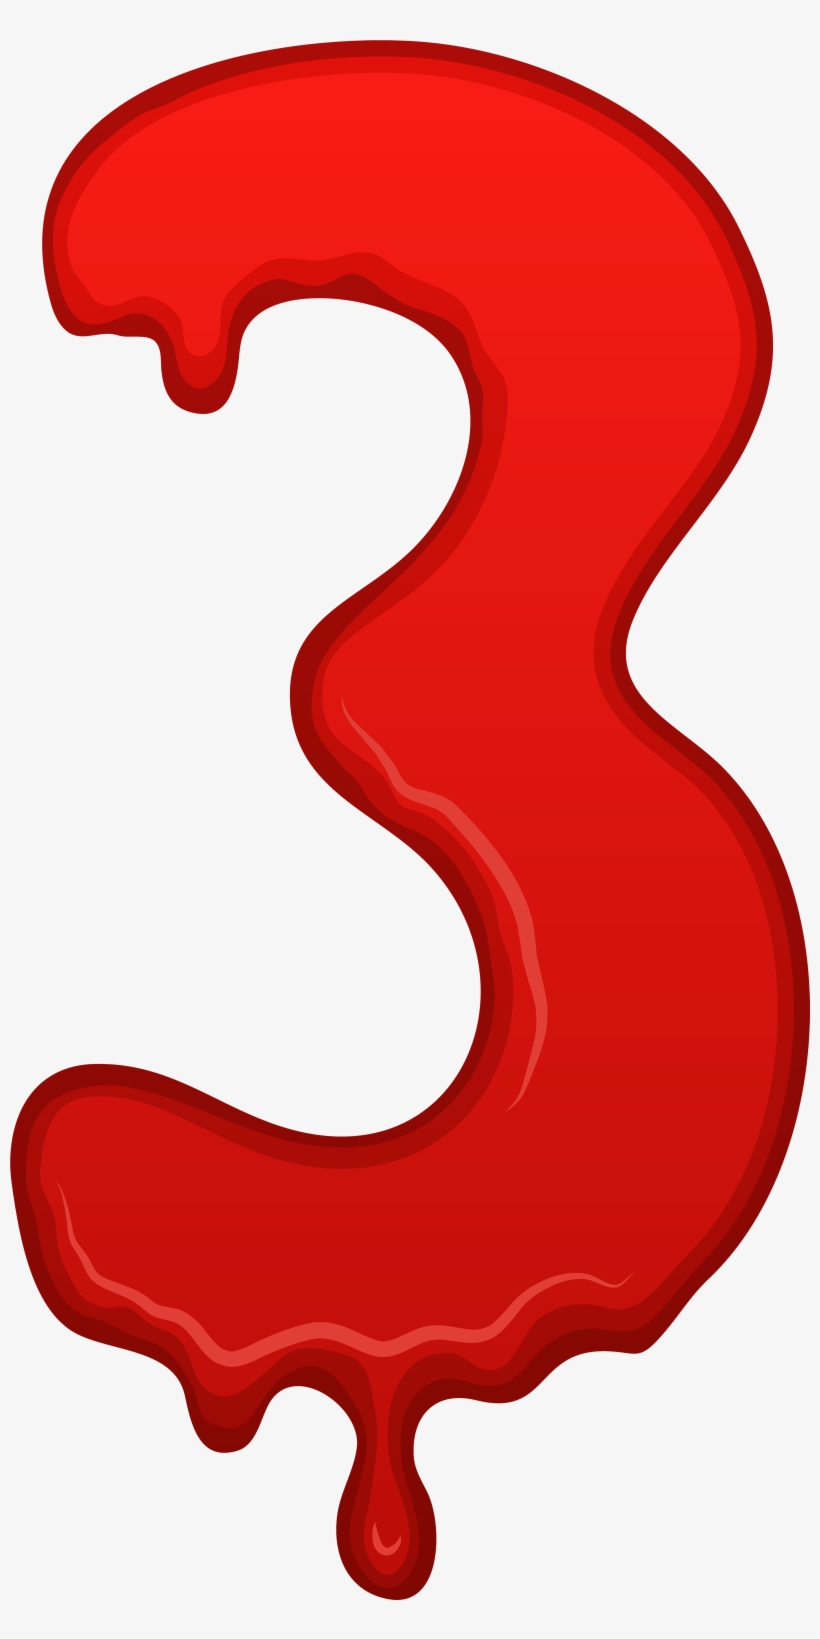 Bloody Number Three Png Clip Art Image - Bloody Number Png, transparent png #8284068